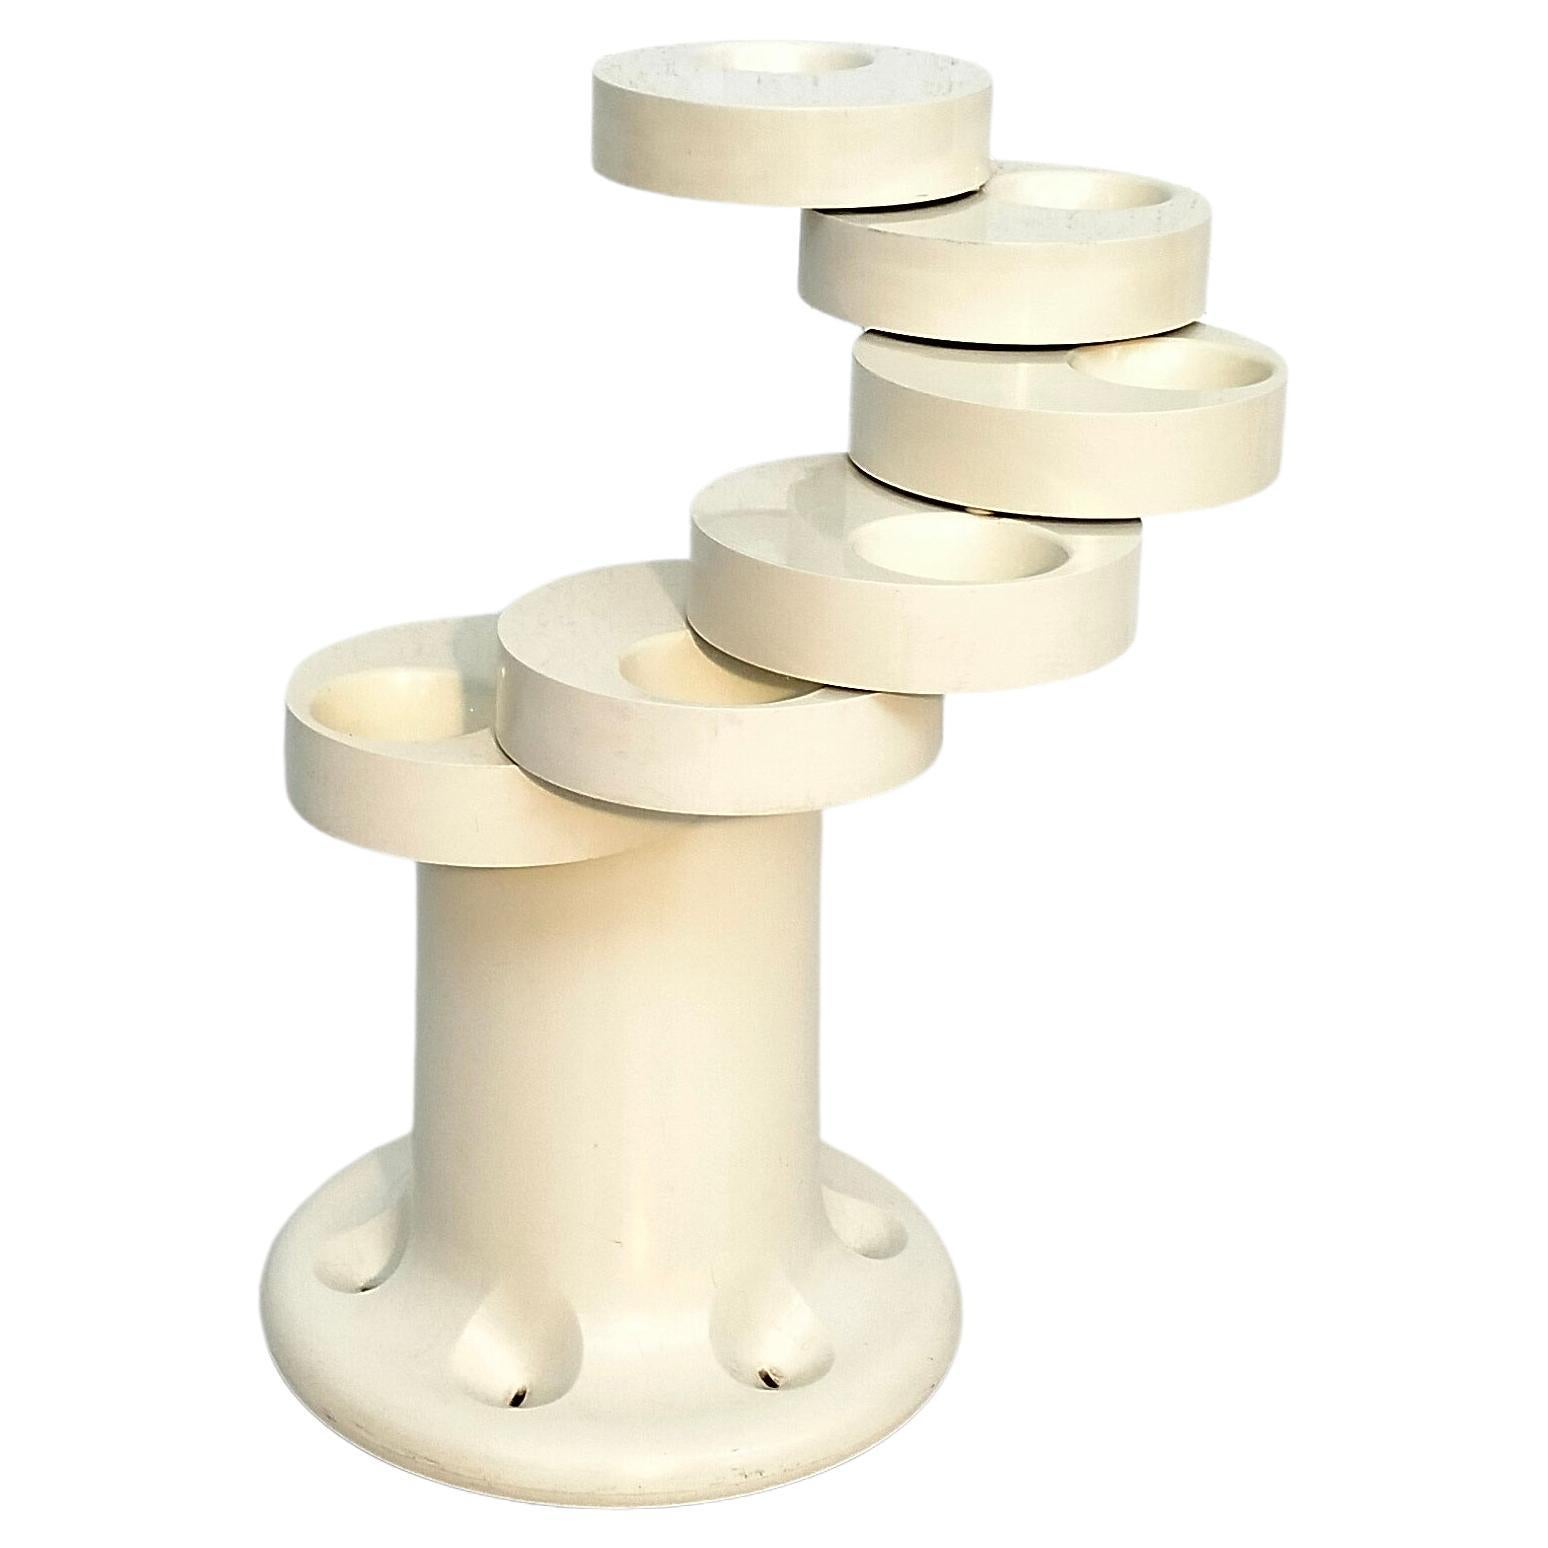 White umbrella stand  Pluvium designed by Giancarlo Piretti and produced by Aanonima Castelli, Italy, 19760s.
An amazing umbrella stand made of plastic in white color created to hold six umbrellas when the umbrella stand is folded up.
Also to push